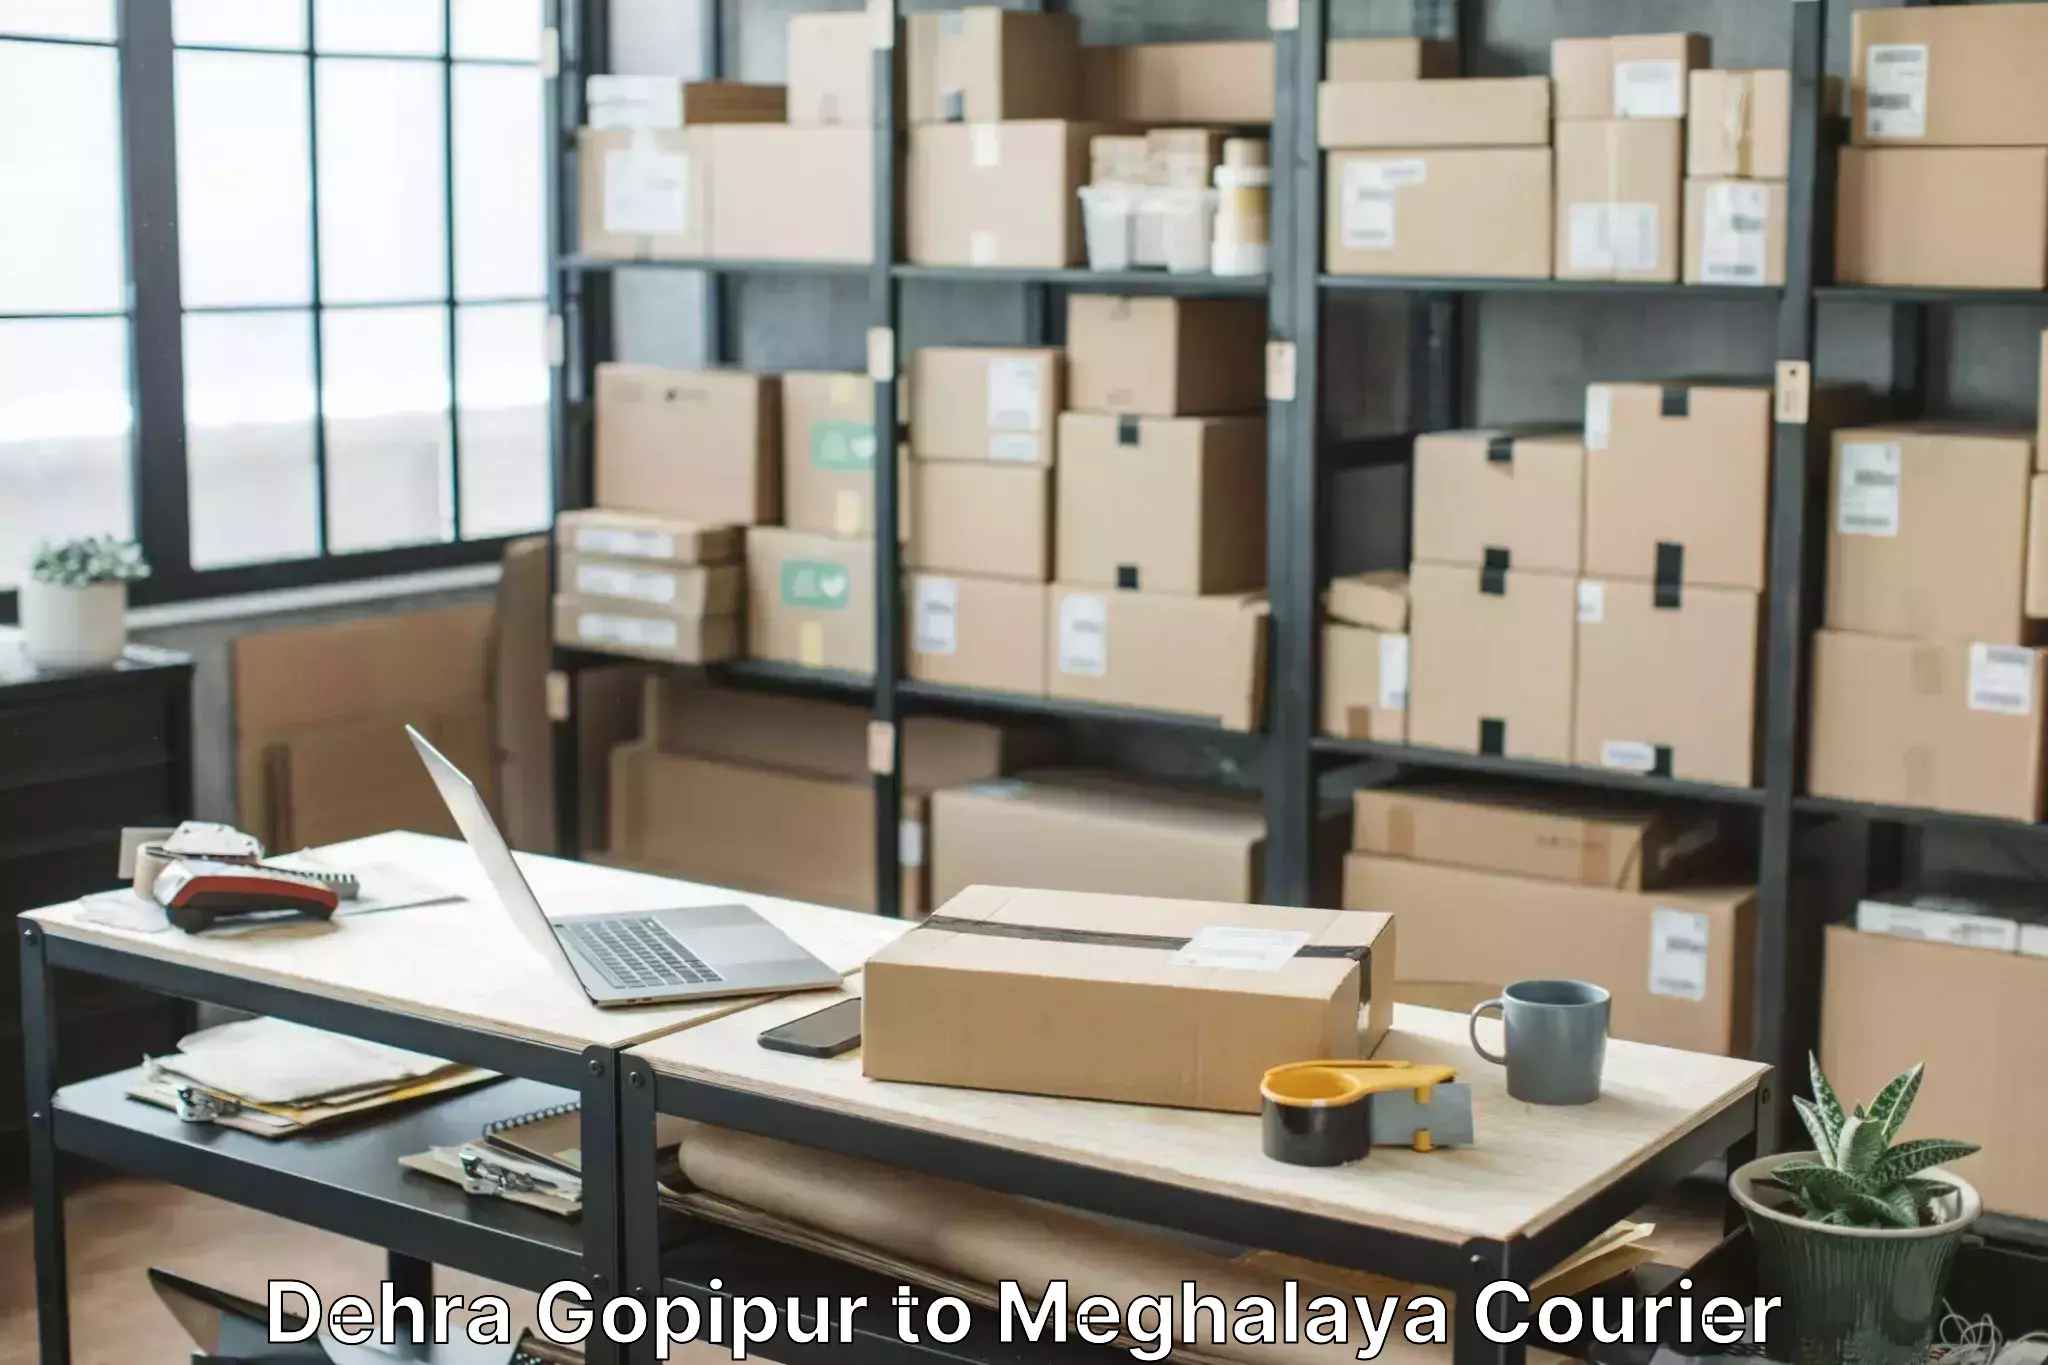 Trusted moving company Dehra Gopipur to Shillong